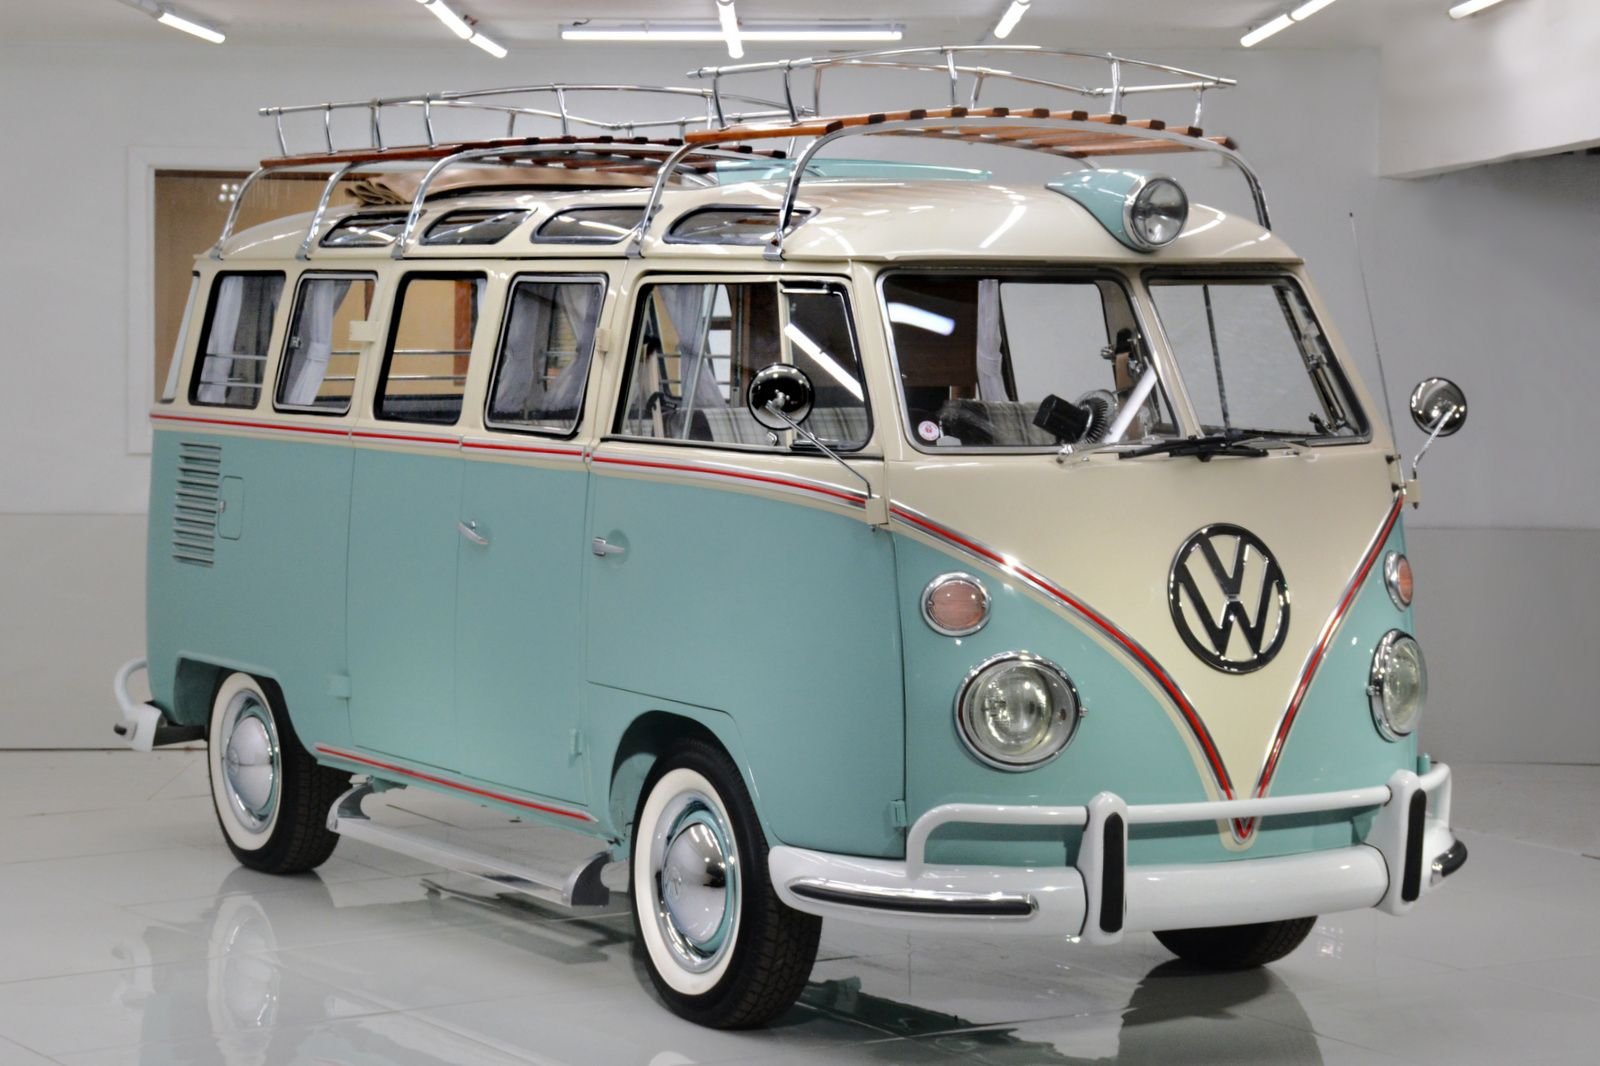 1969 Used Volkswagen 23 Window Bus At WeBe Autos Serving Long Island ...